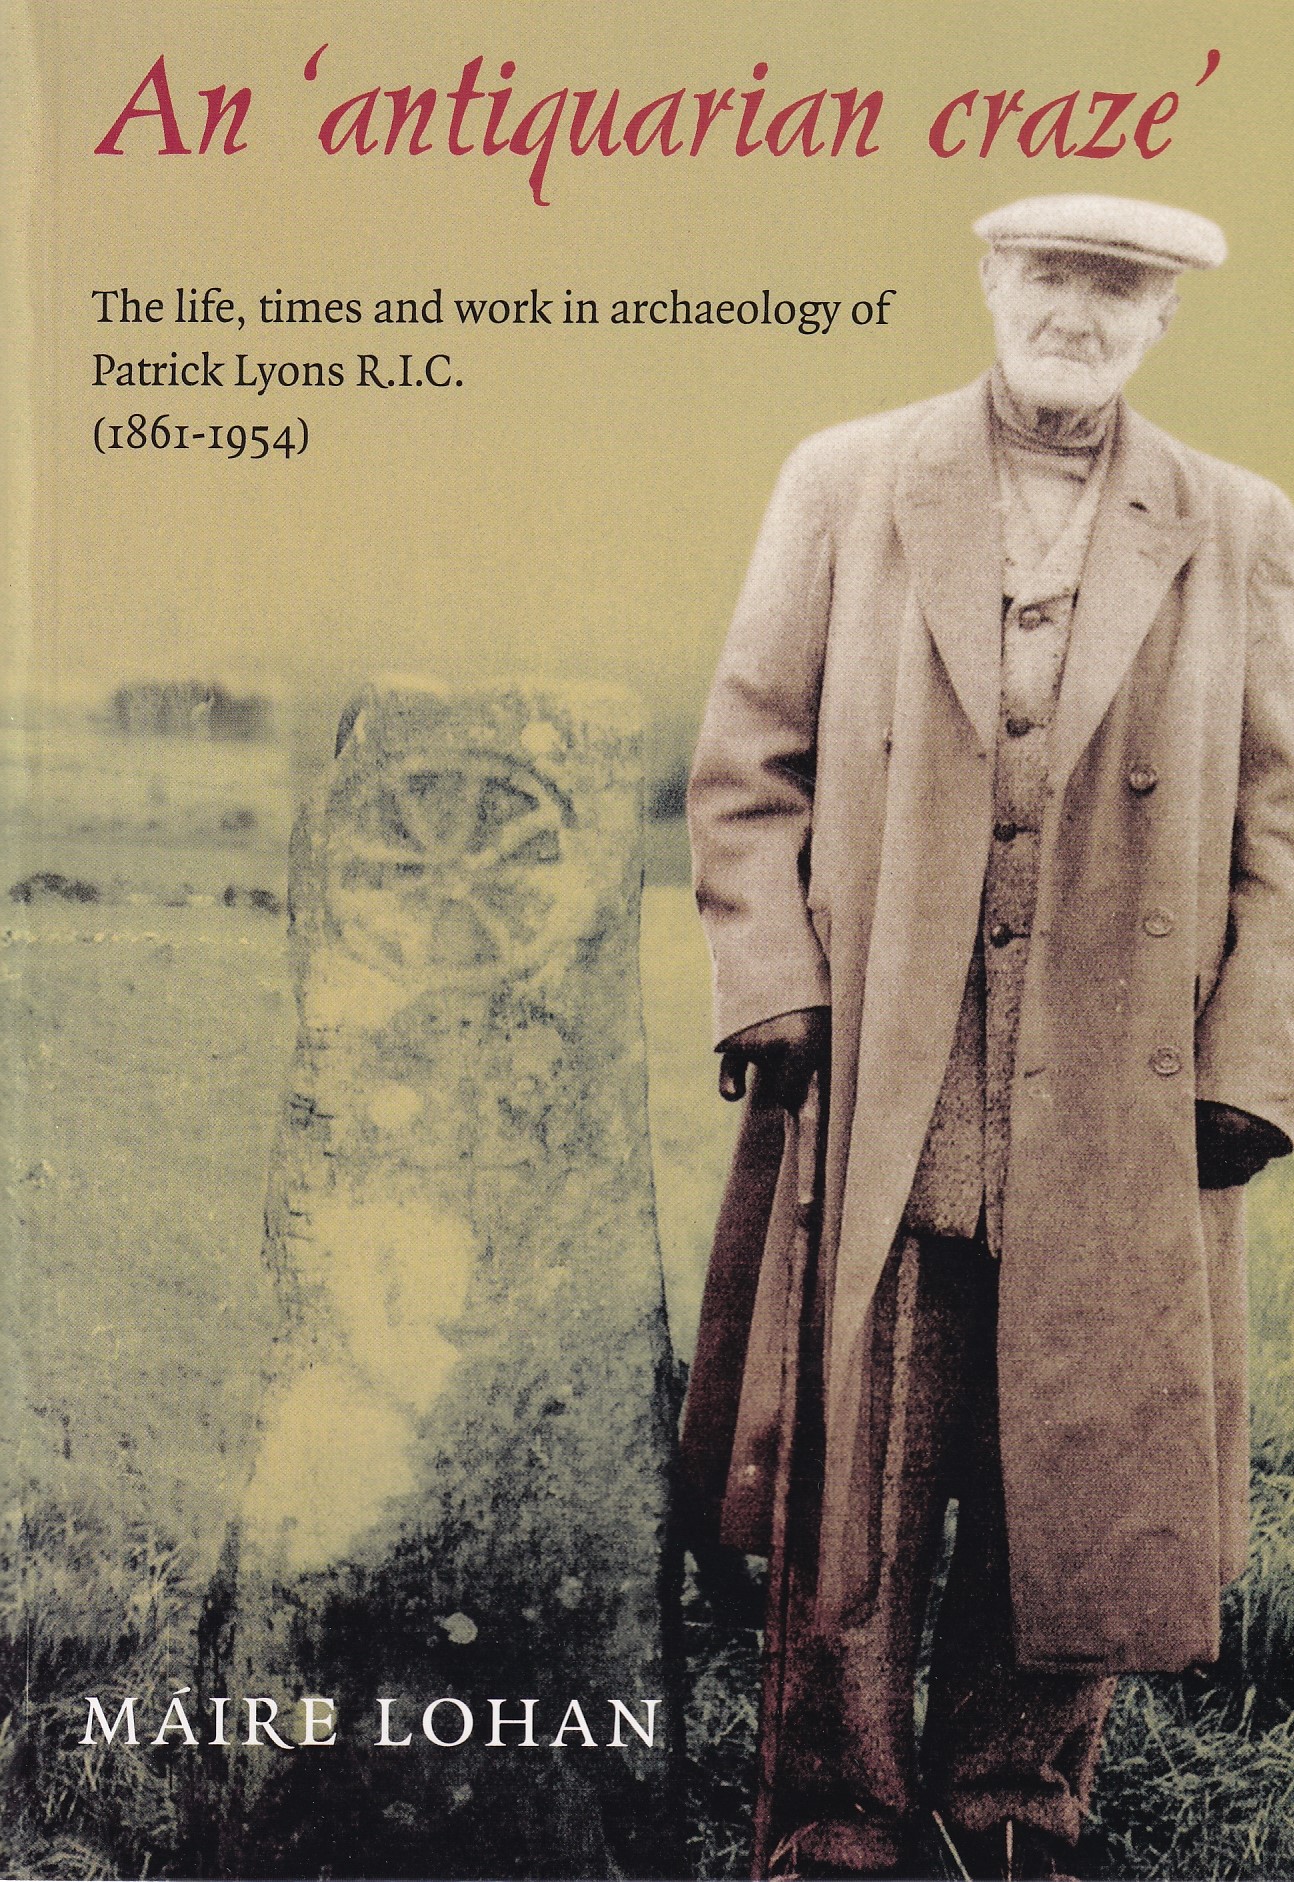 An ‘Antiquarian Craze’: The life, times and work in archaeology of Patrick Lyons, R.I.C (1881-1954) | Máire Lohan | Charlie Byrne's